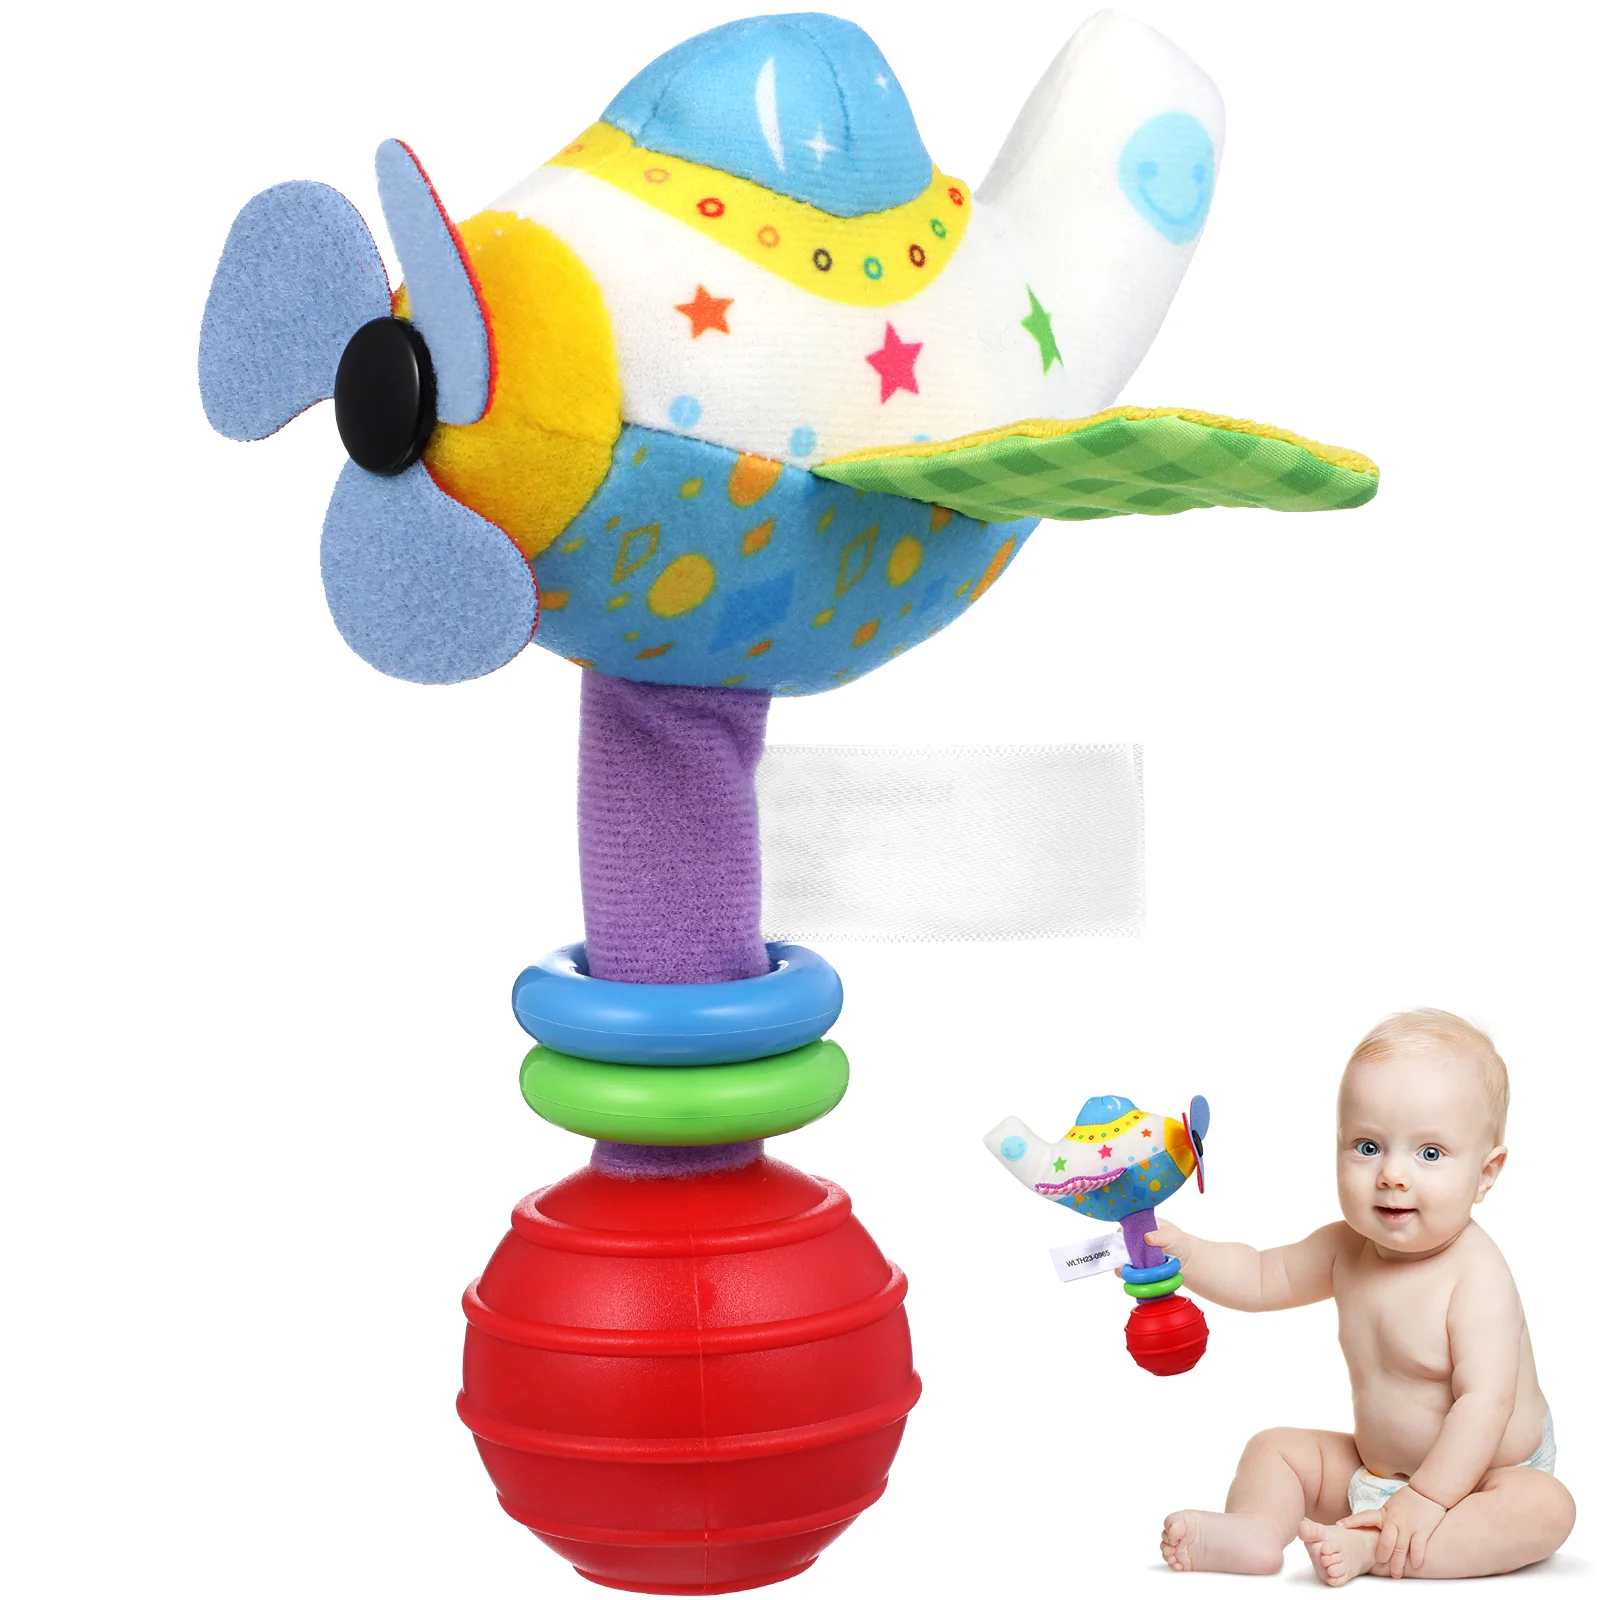 

Bed Bell Hand Infant Baby Toy Creative Toys Newborn Educational Plaything Rattles Lovely Sounding Adorable Early Leaning